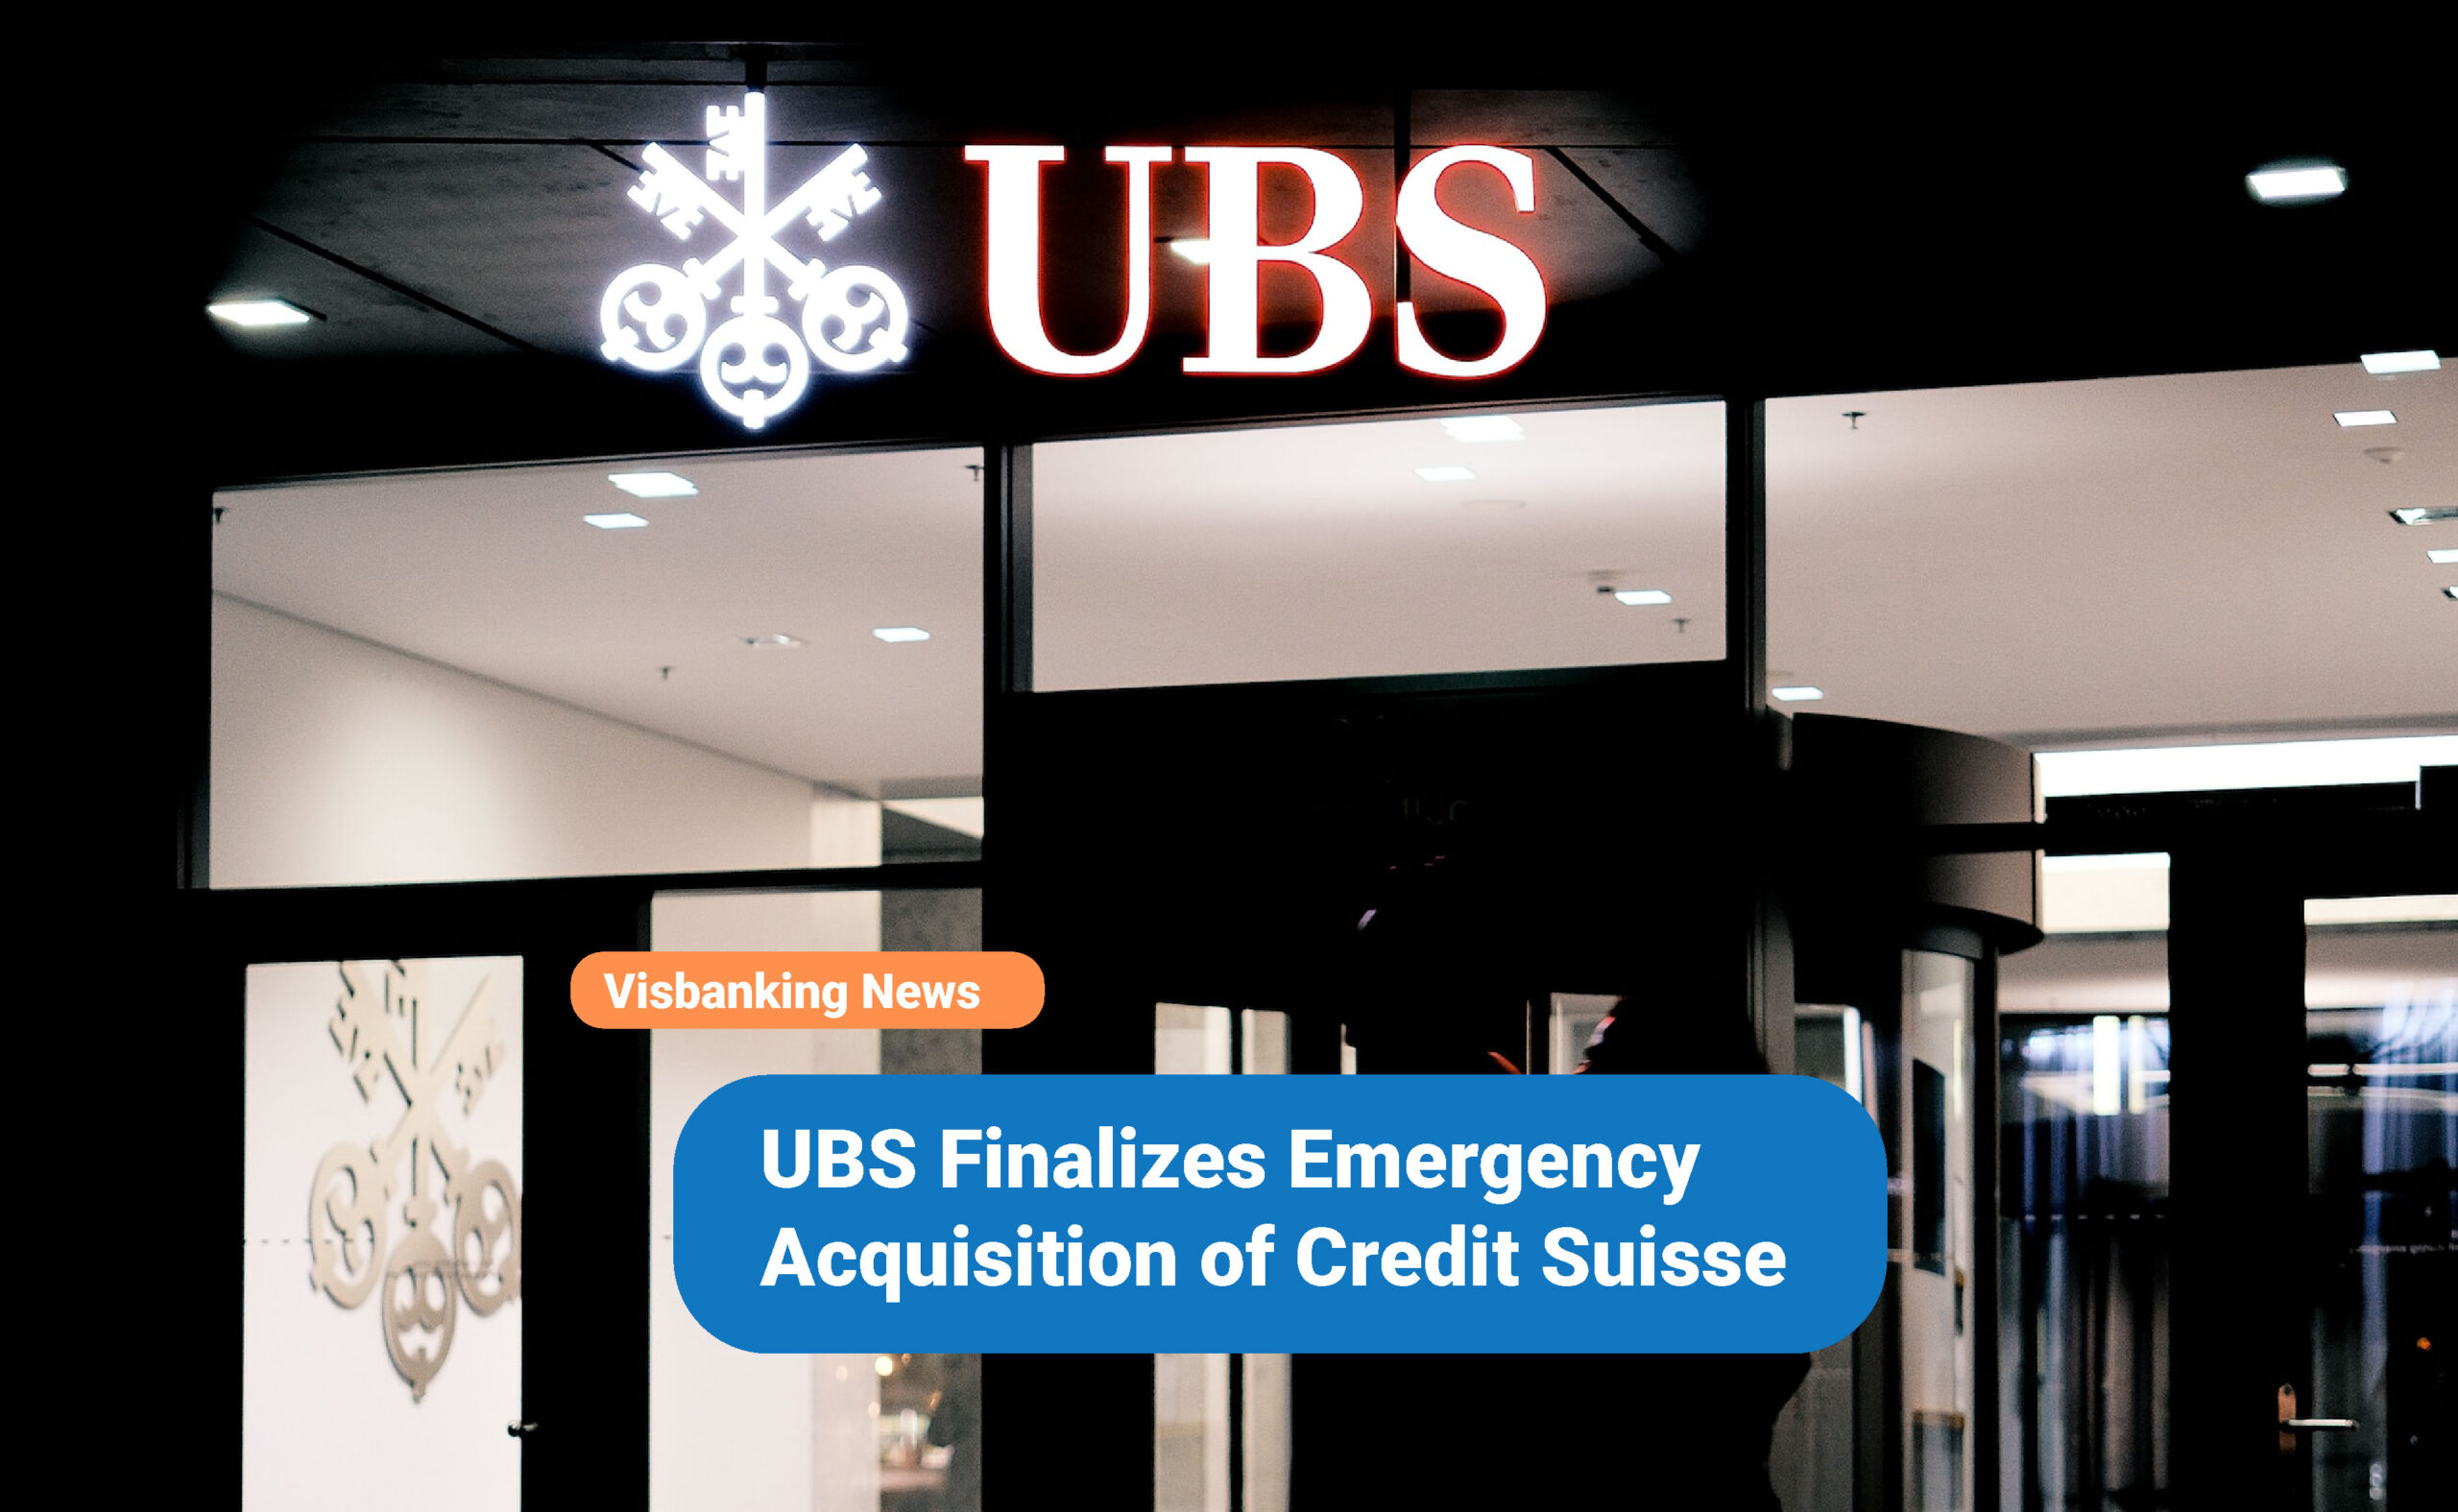 UBS Finalizes Emergency Acquisition of Credit Suisse